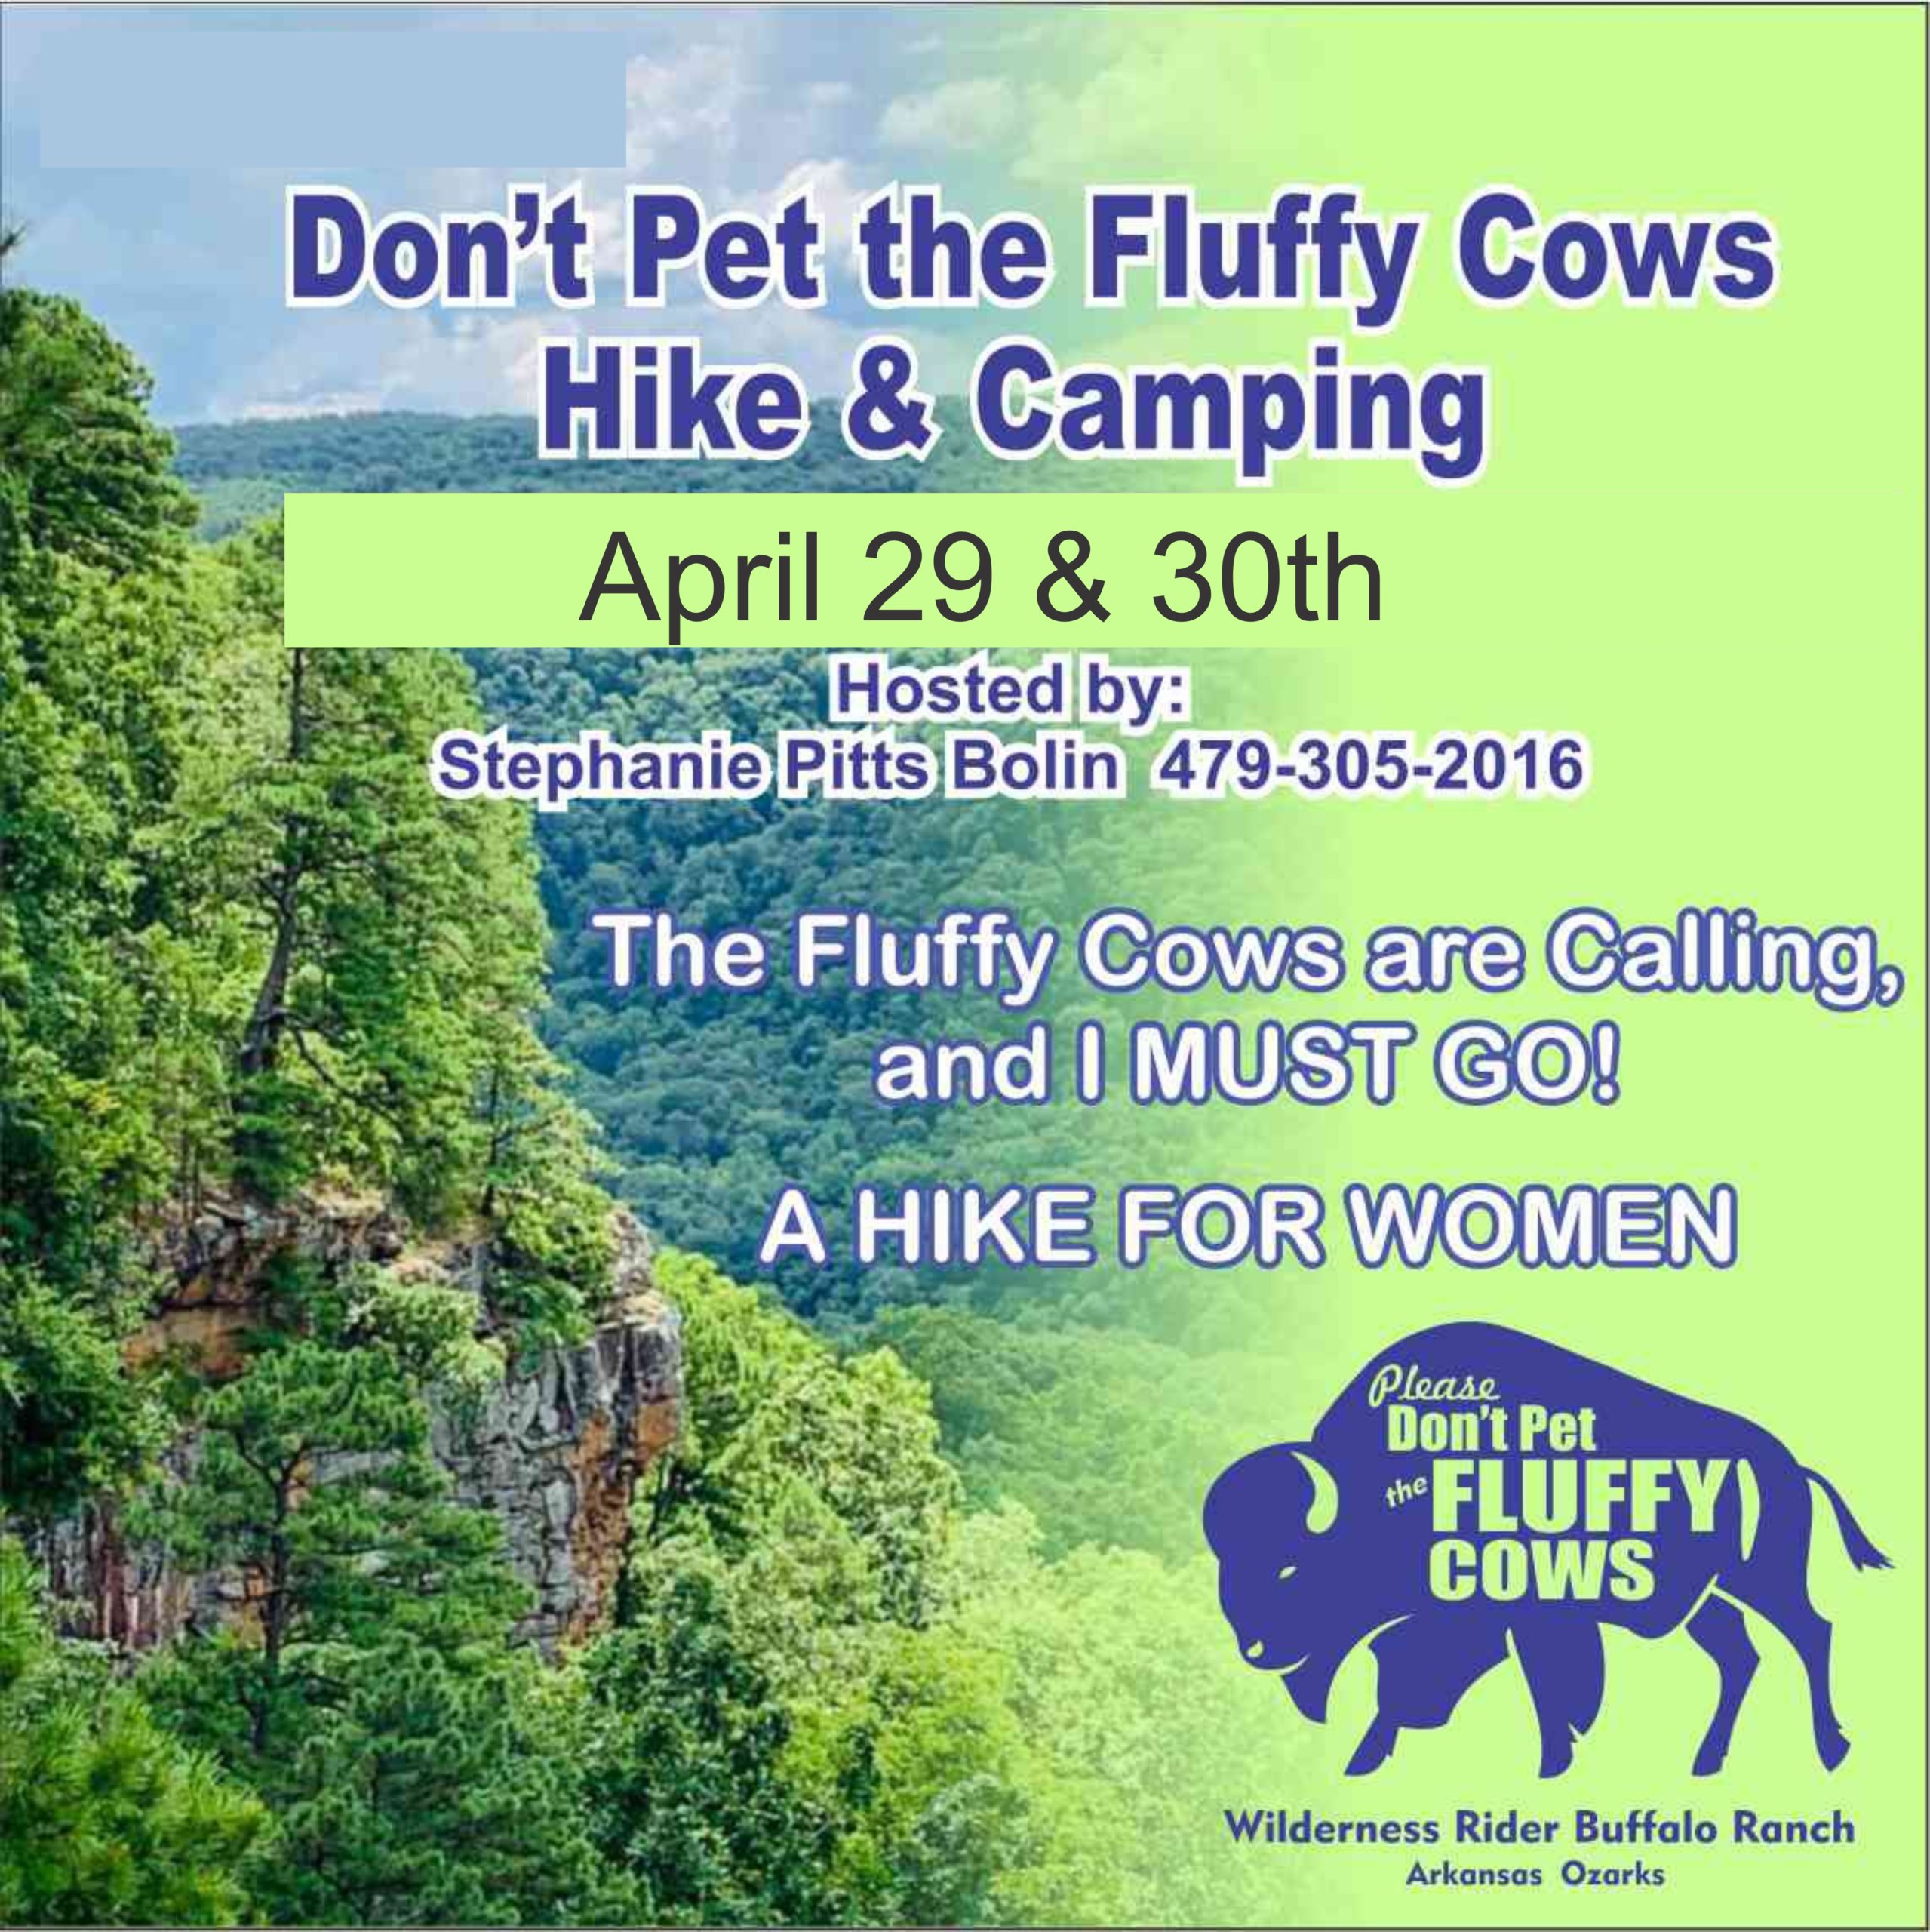 Don't pet the fluffy cows camp and hike